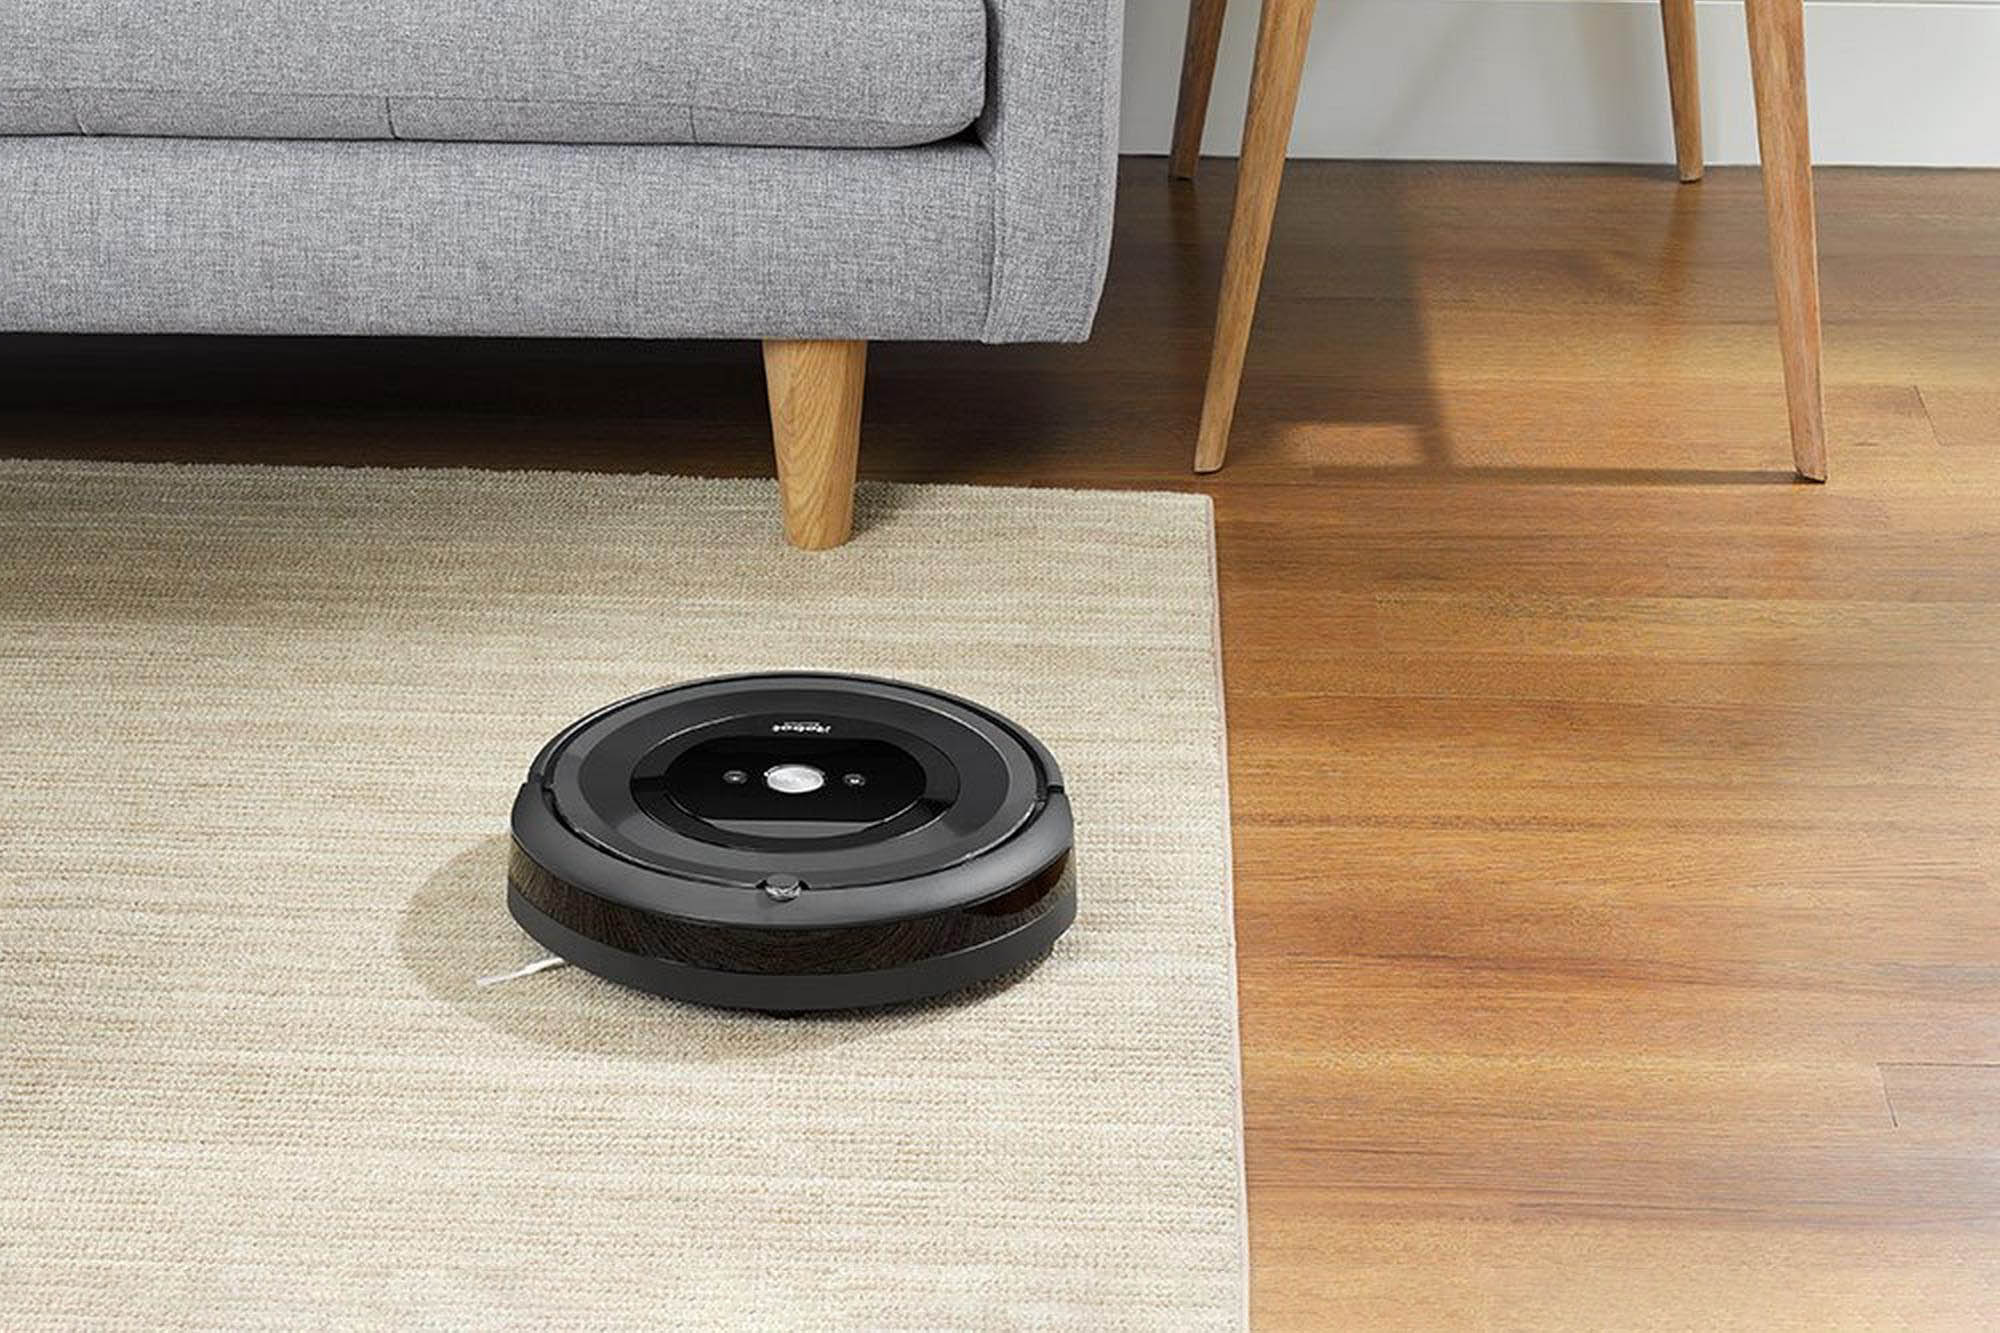 iRobot Roomba e5 review: Superb and affordable | Digital Trends